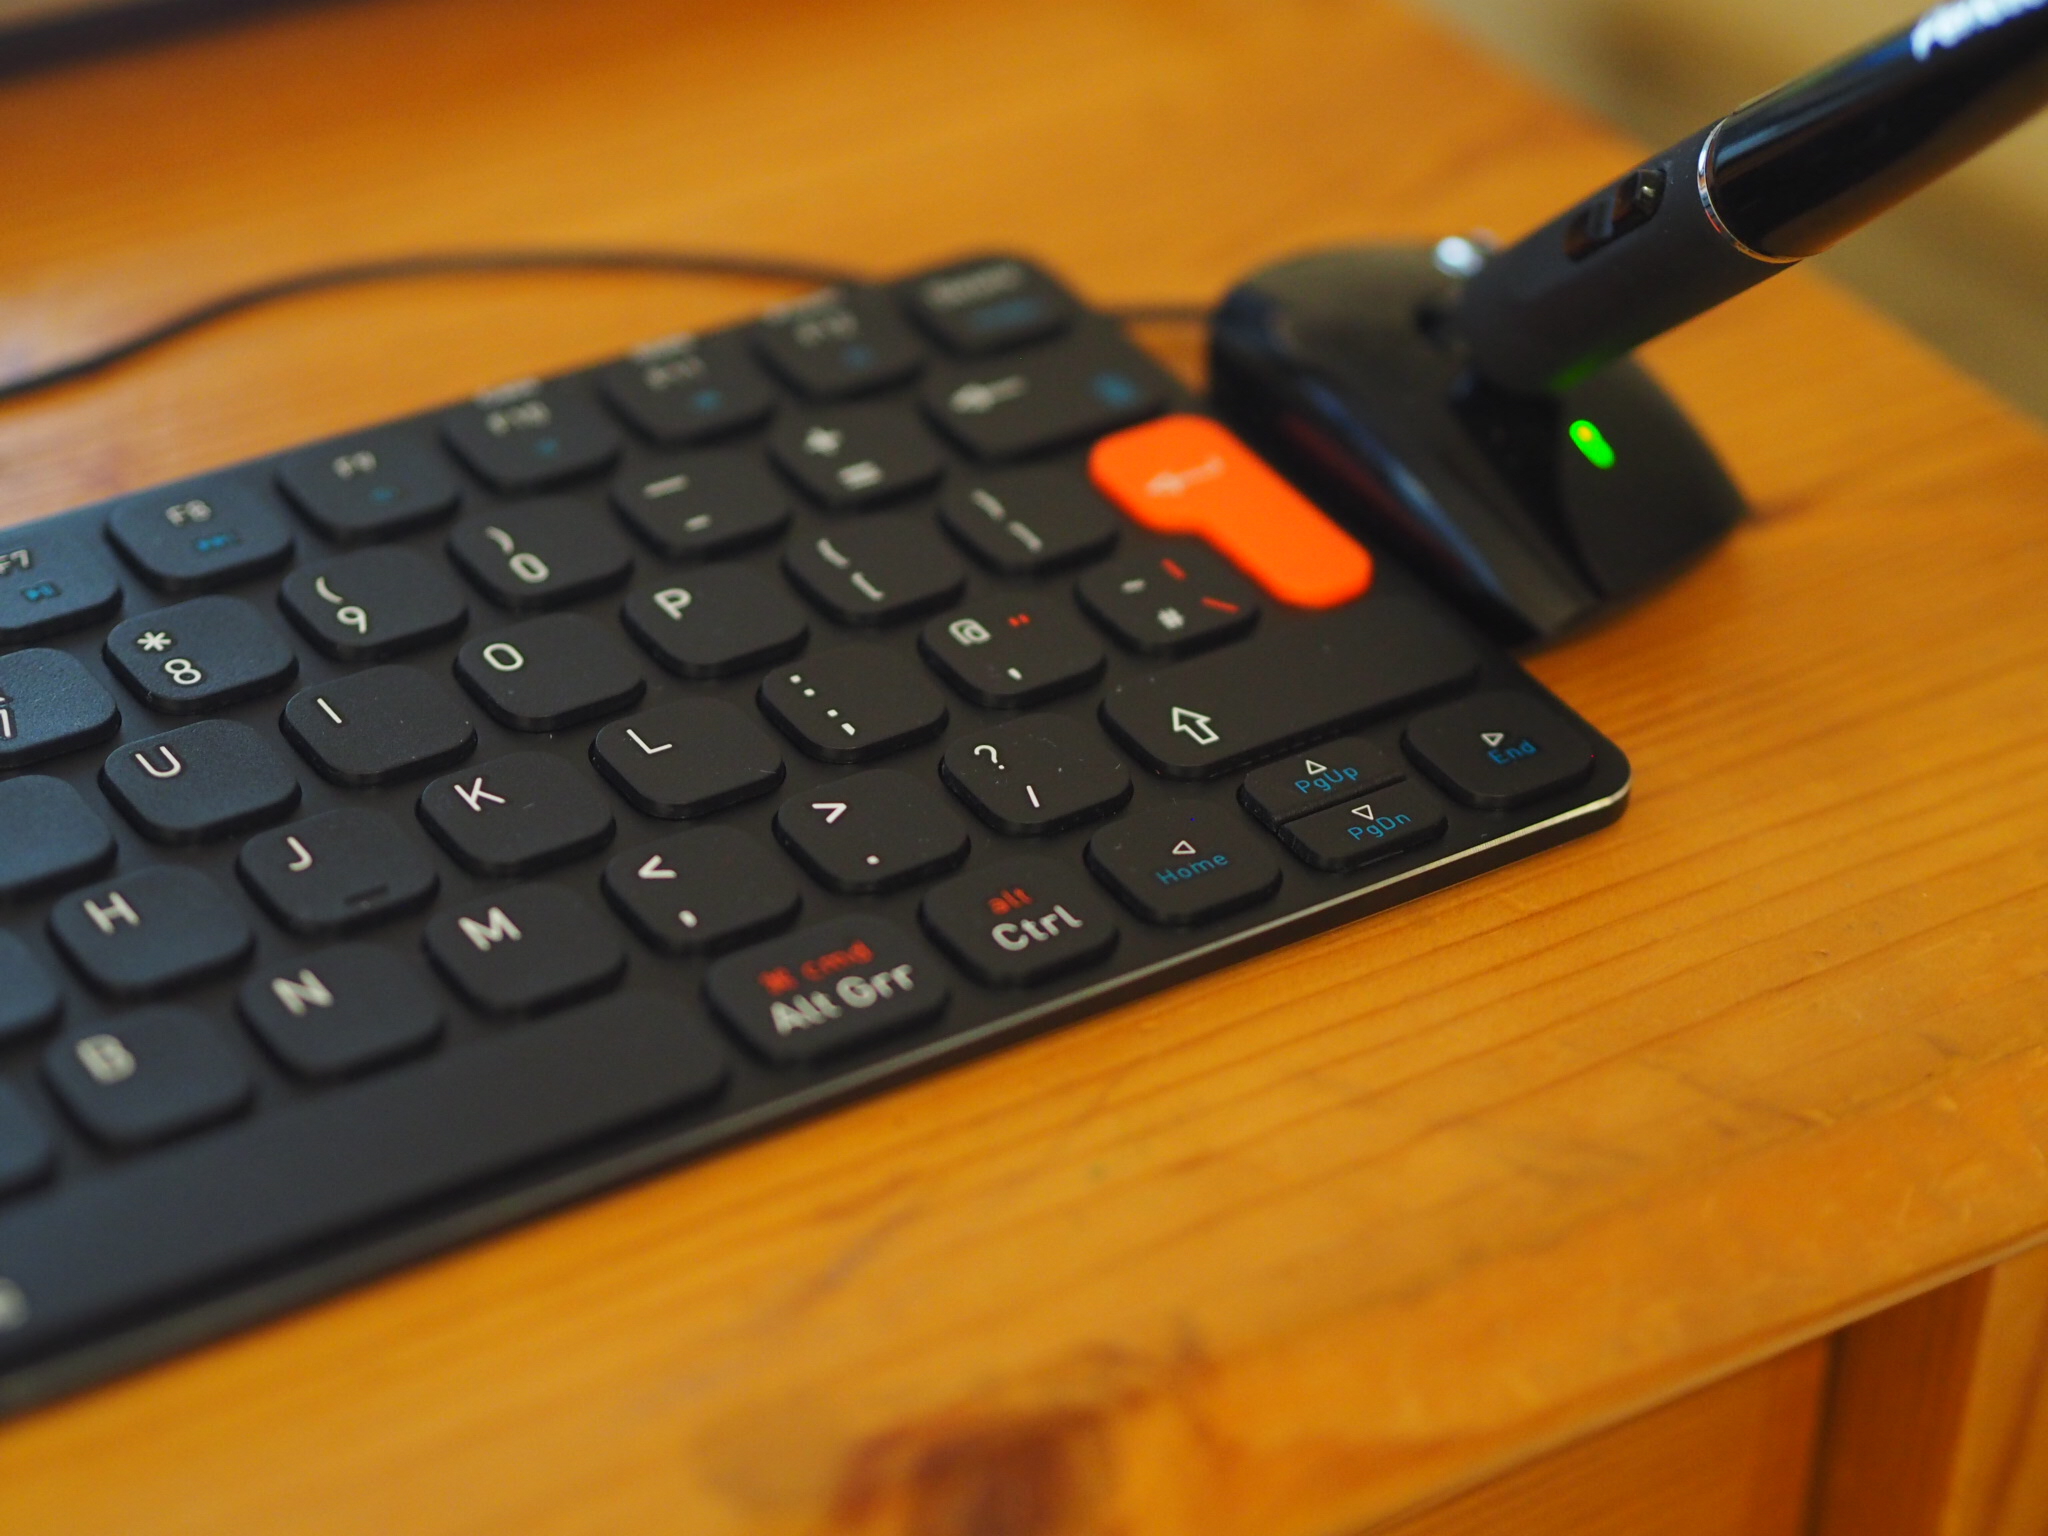 The Penclic Keyboard Reloaded with the KB3 Mini Keyboard